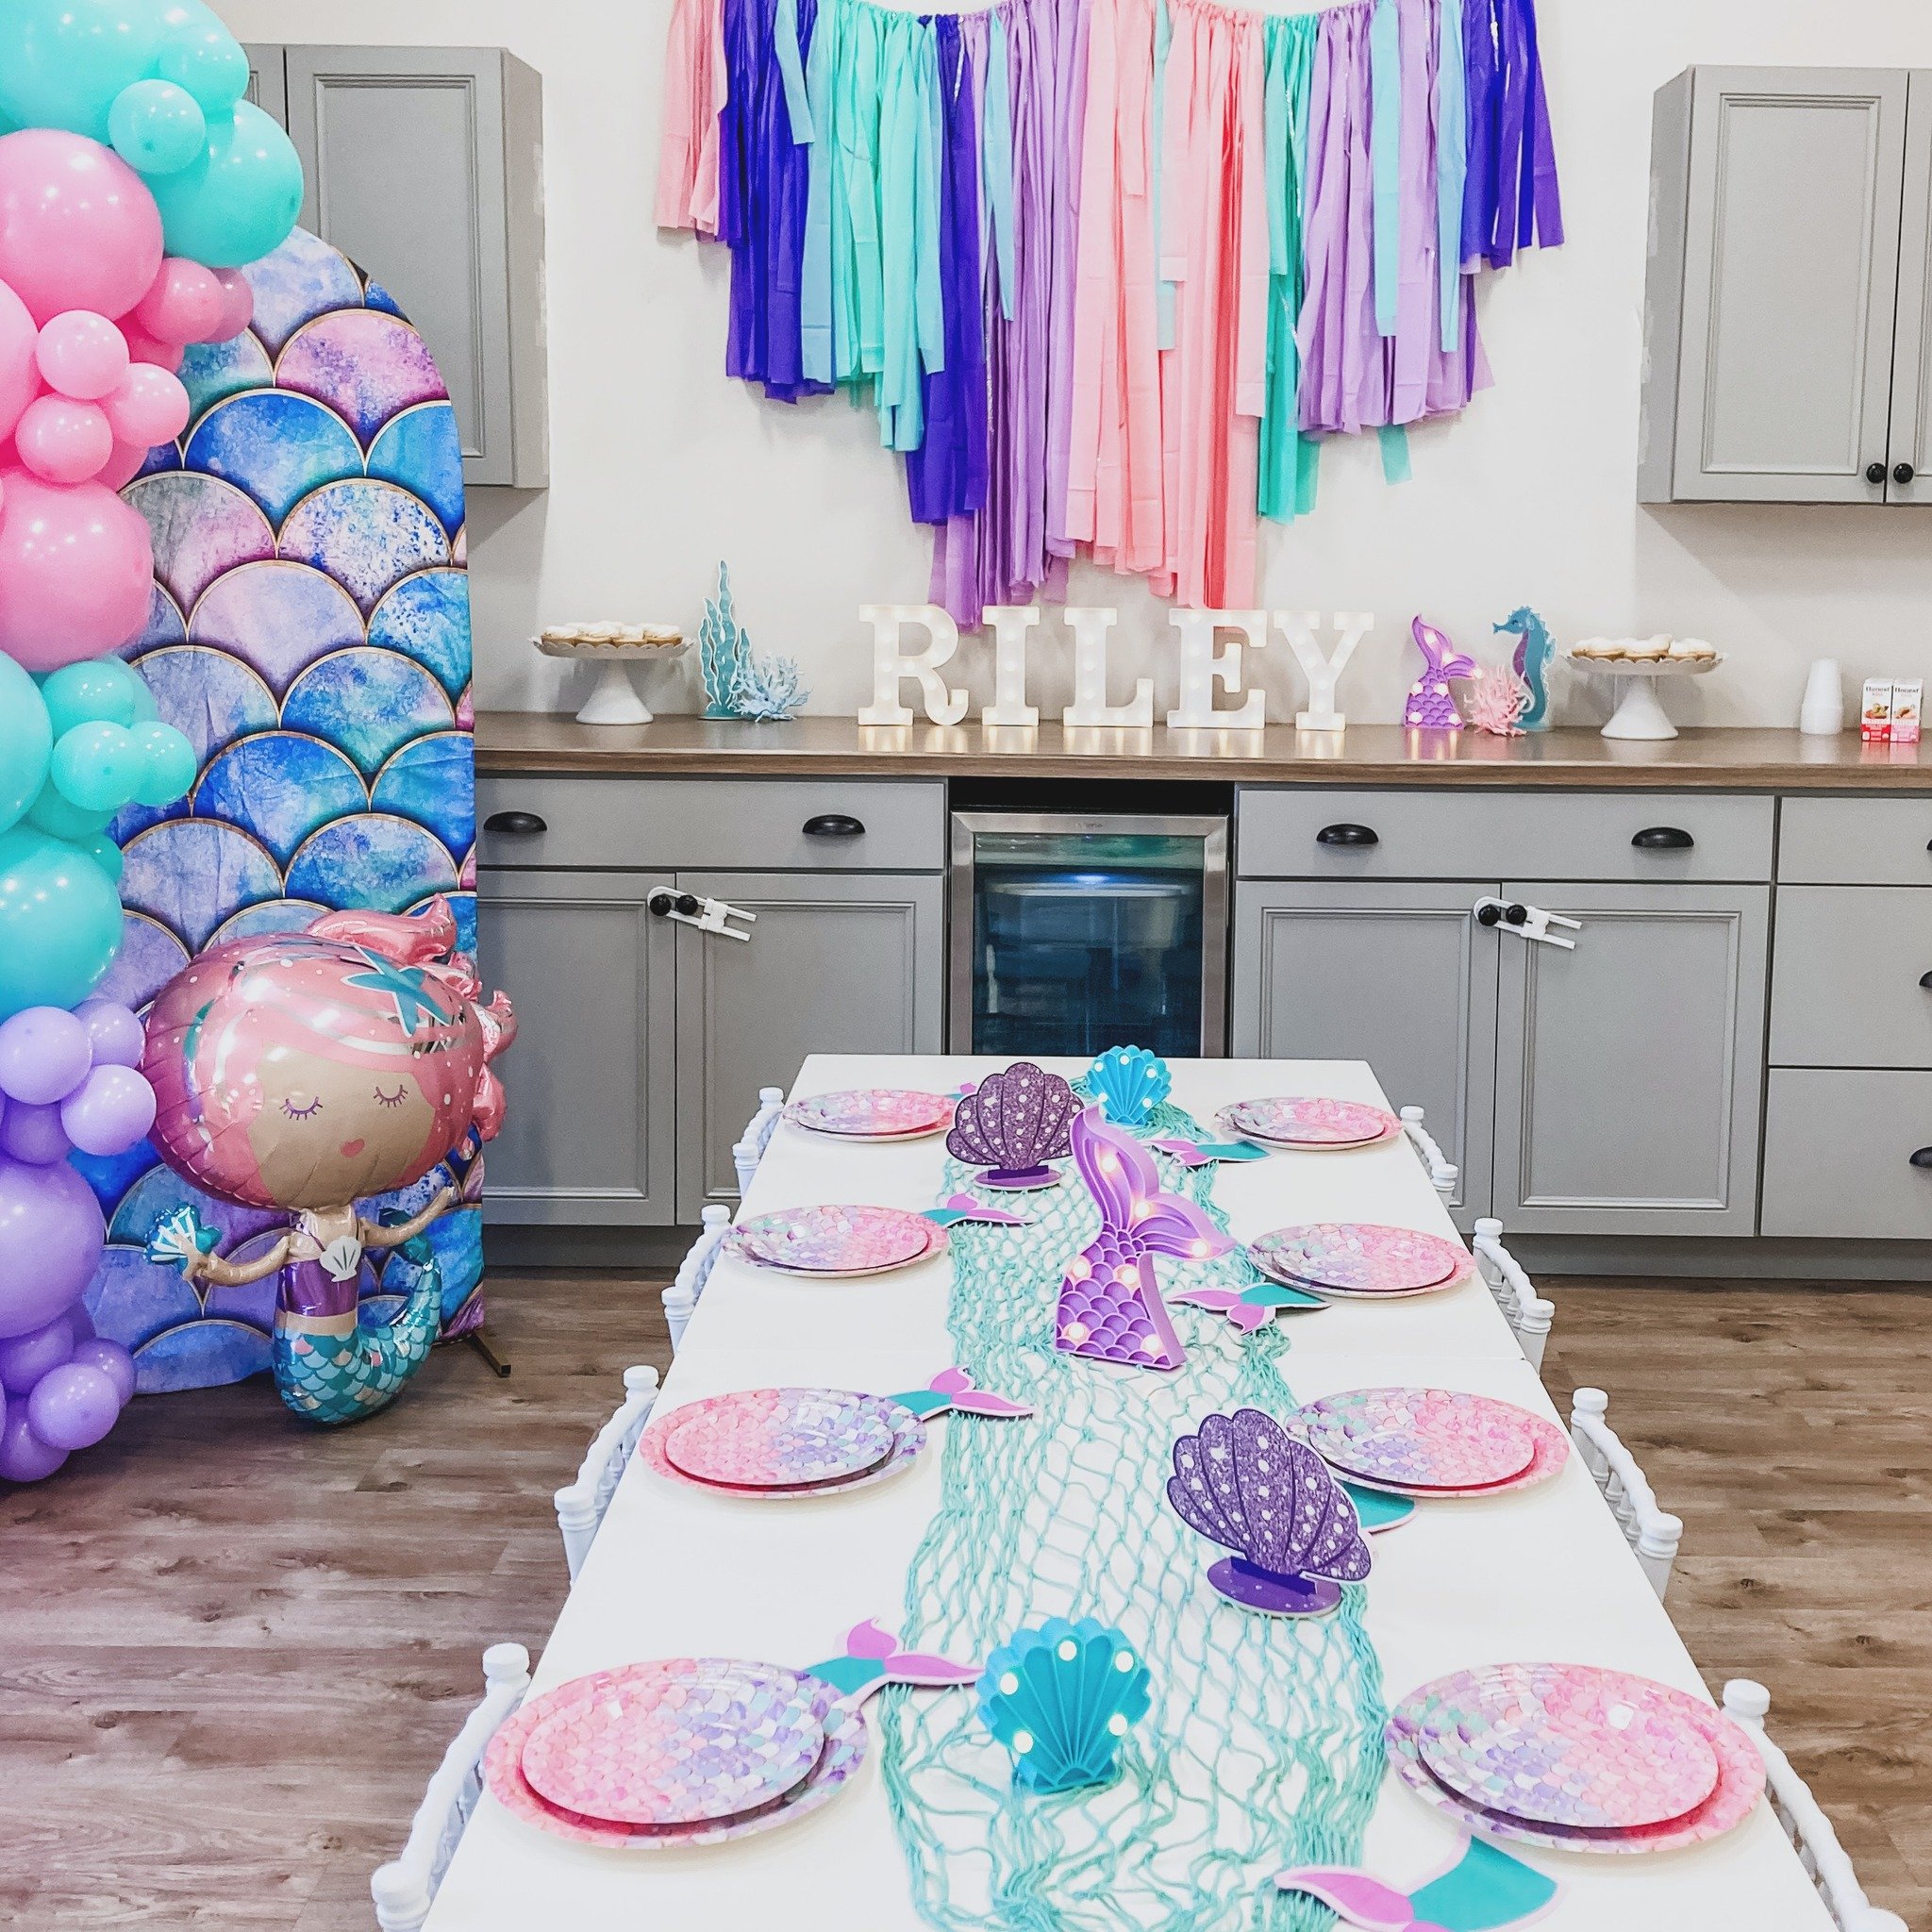 Mermaid Vibes for Riley&rsquo;s birthday 🧜&zwj;♀️ 

I love the Marquee add on letters &amp; balloon display. 

We are now booking for June &amp; July. Limited dates available for May.